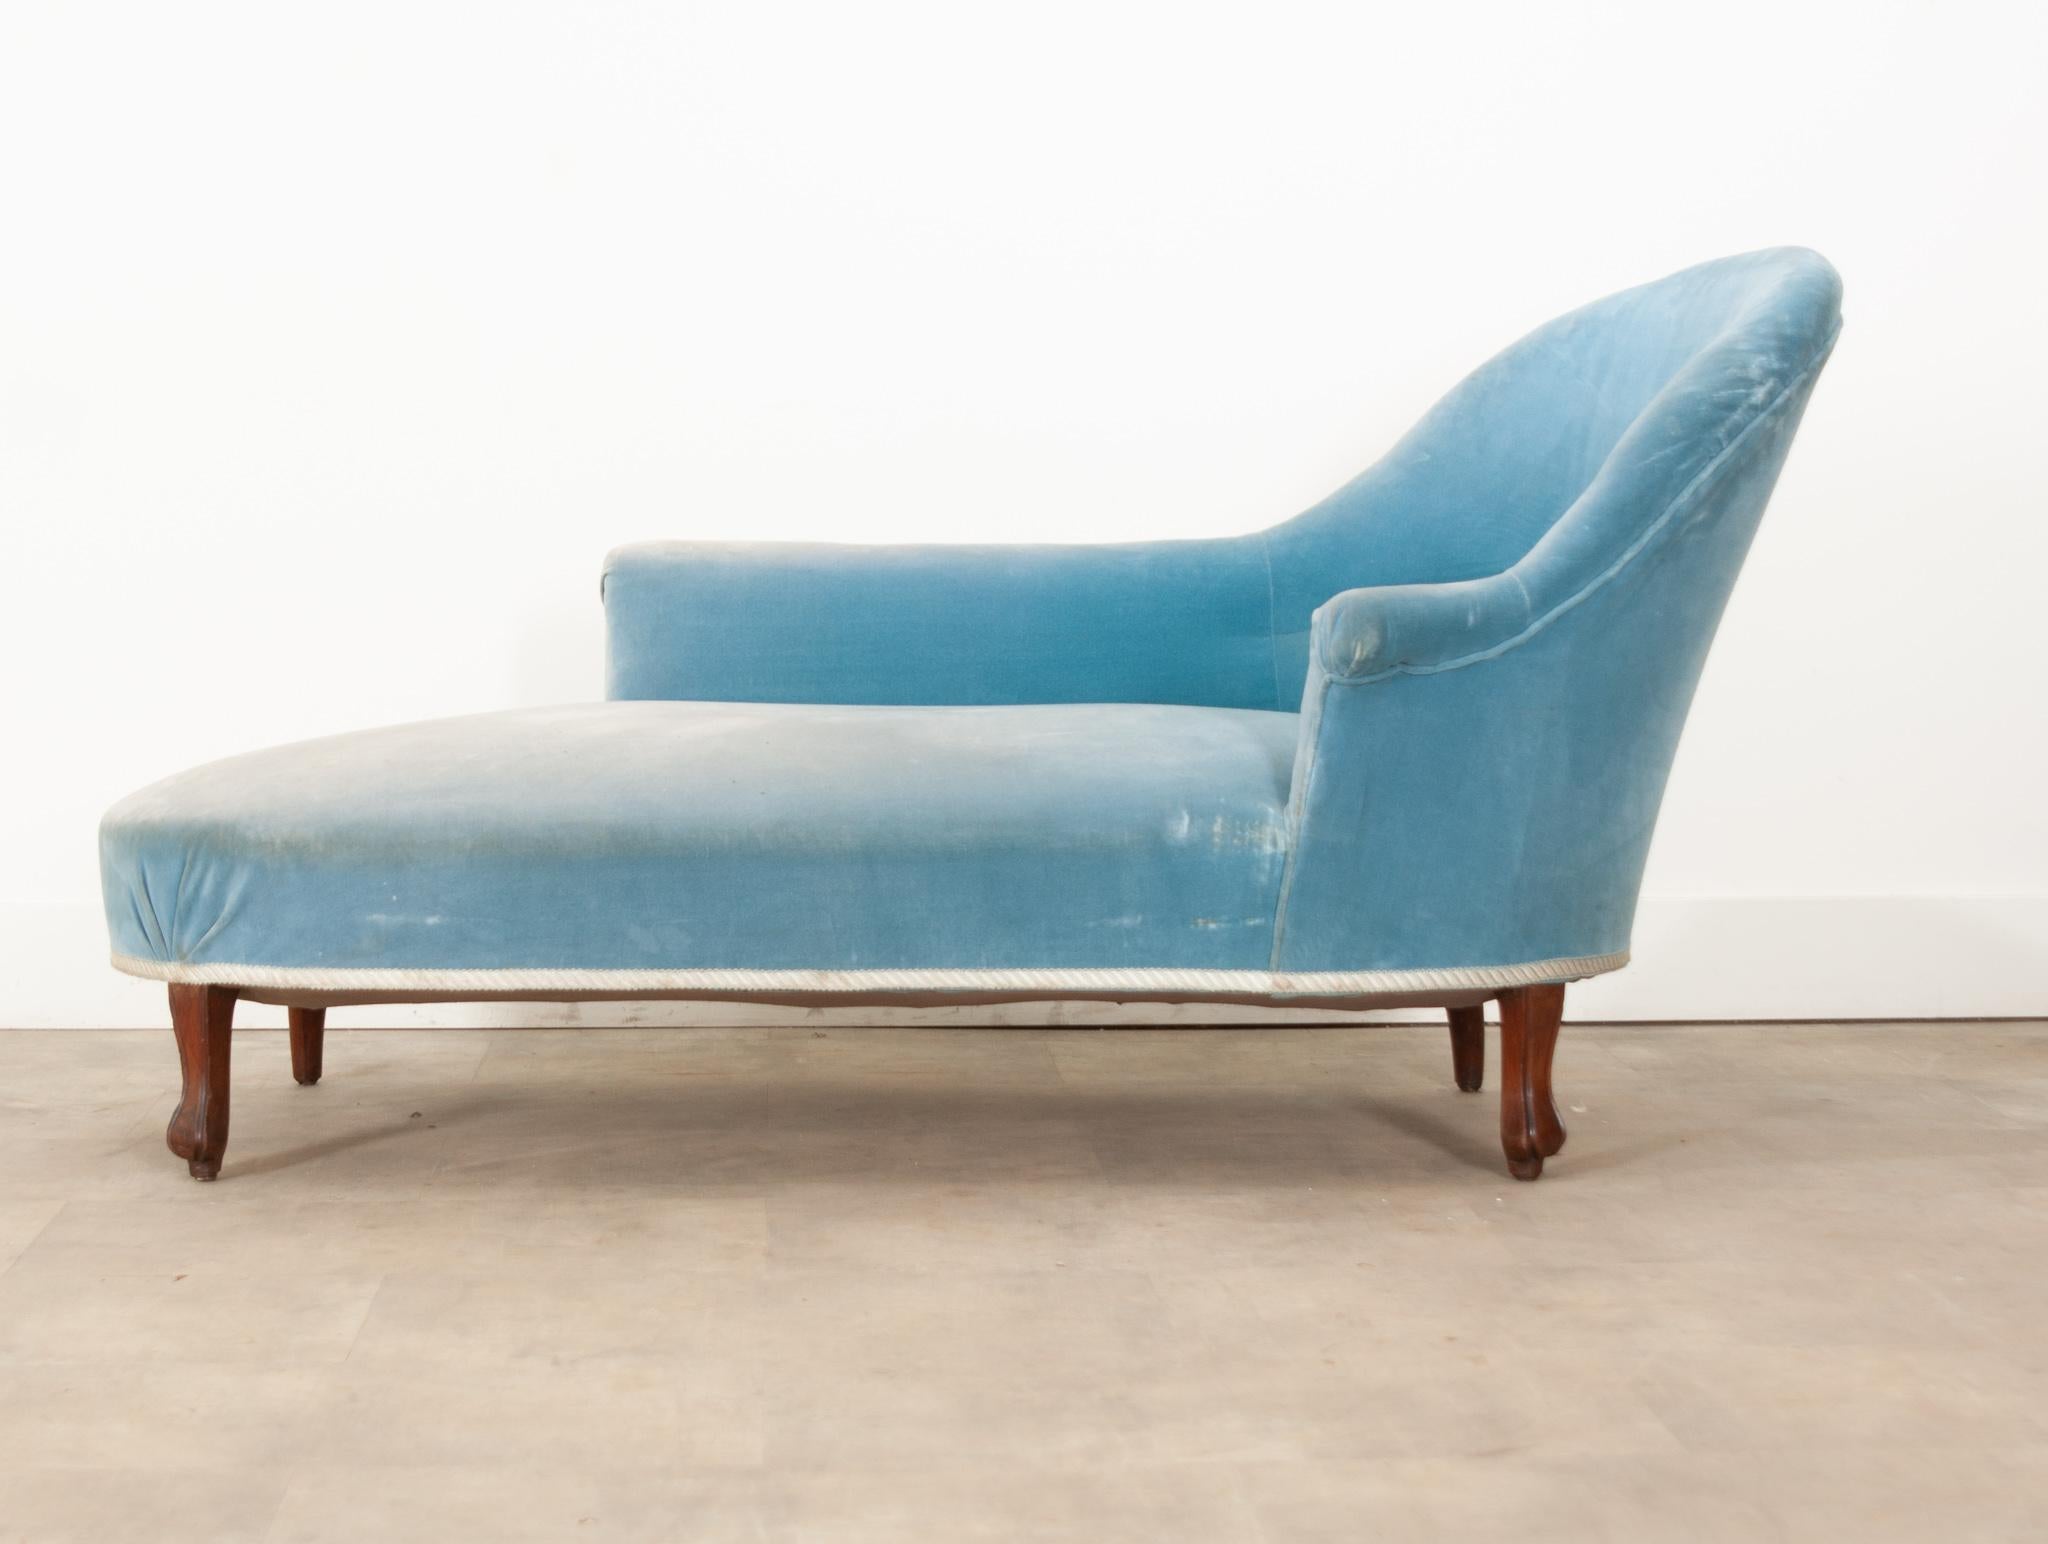 A beautiful French eye-catching blue velvet chaise longue with a classic Art Deco style shape, very comfortable cushioning, and smooth, sturdy legs on peg feet. This sumptuous seating is the perfect combination of comfort and composition, this